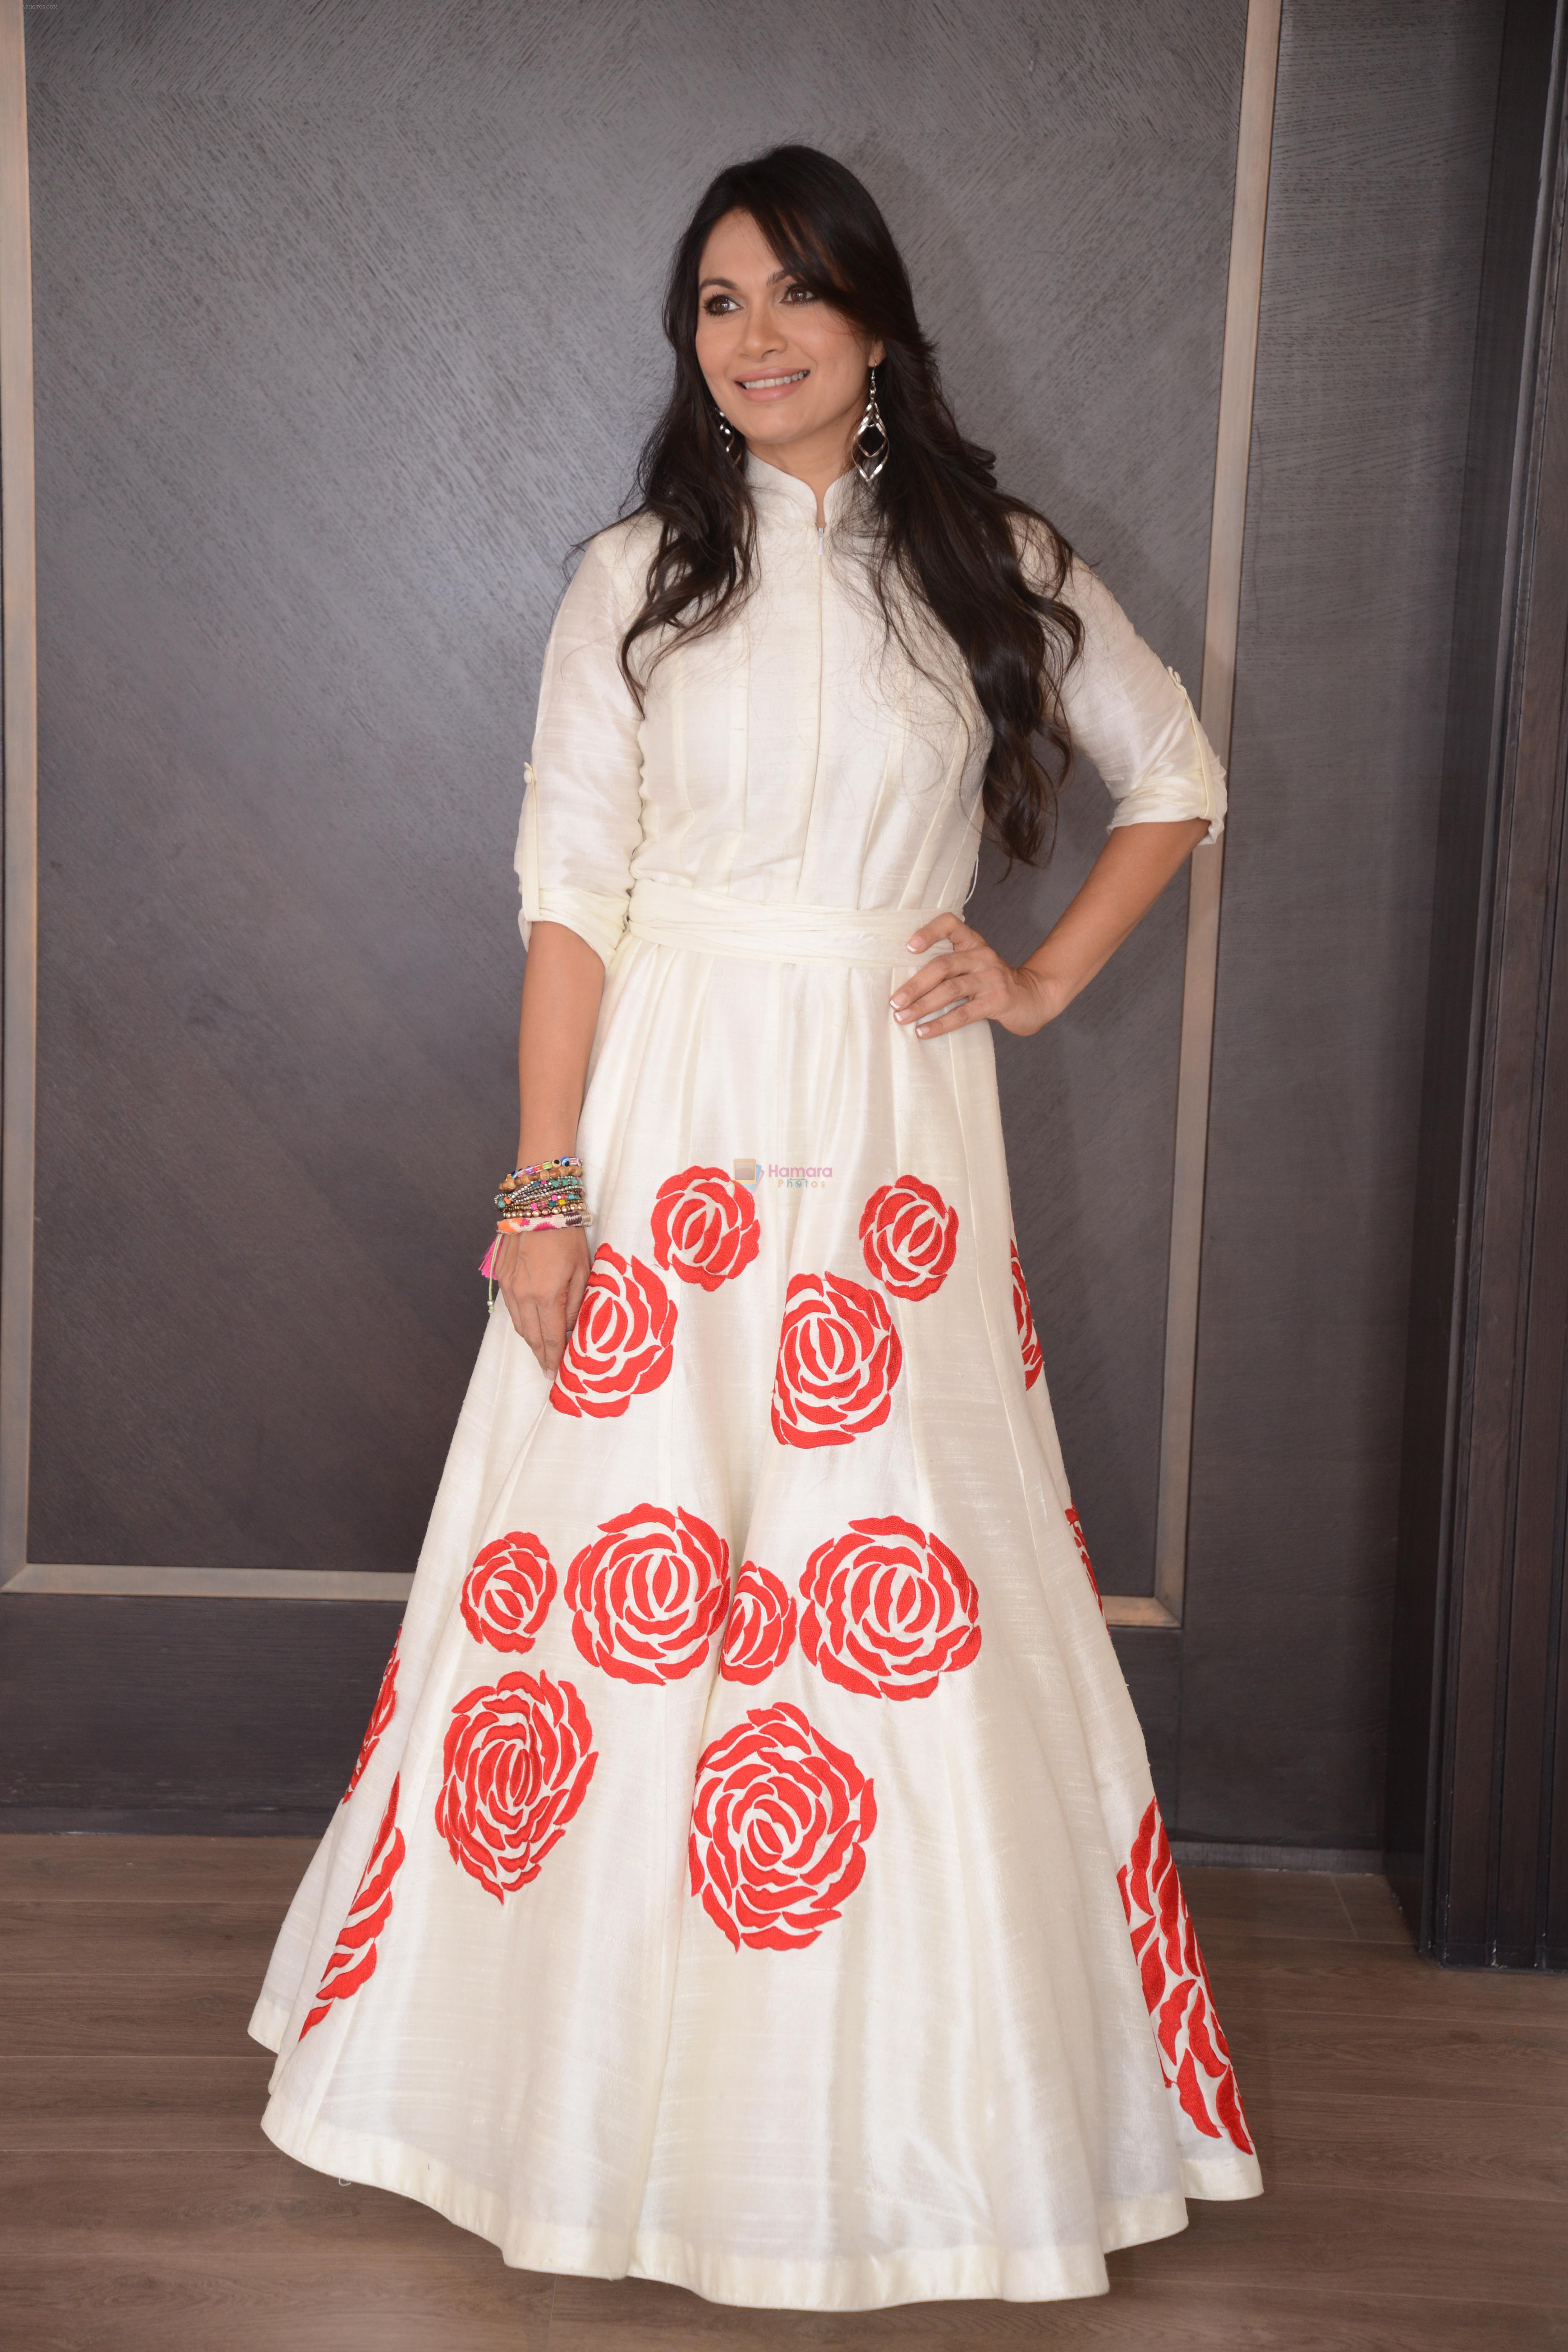 Maria Goretti looks stunning in an outfit by Mayyur Girotra